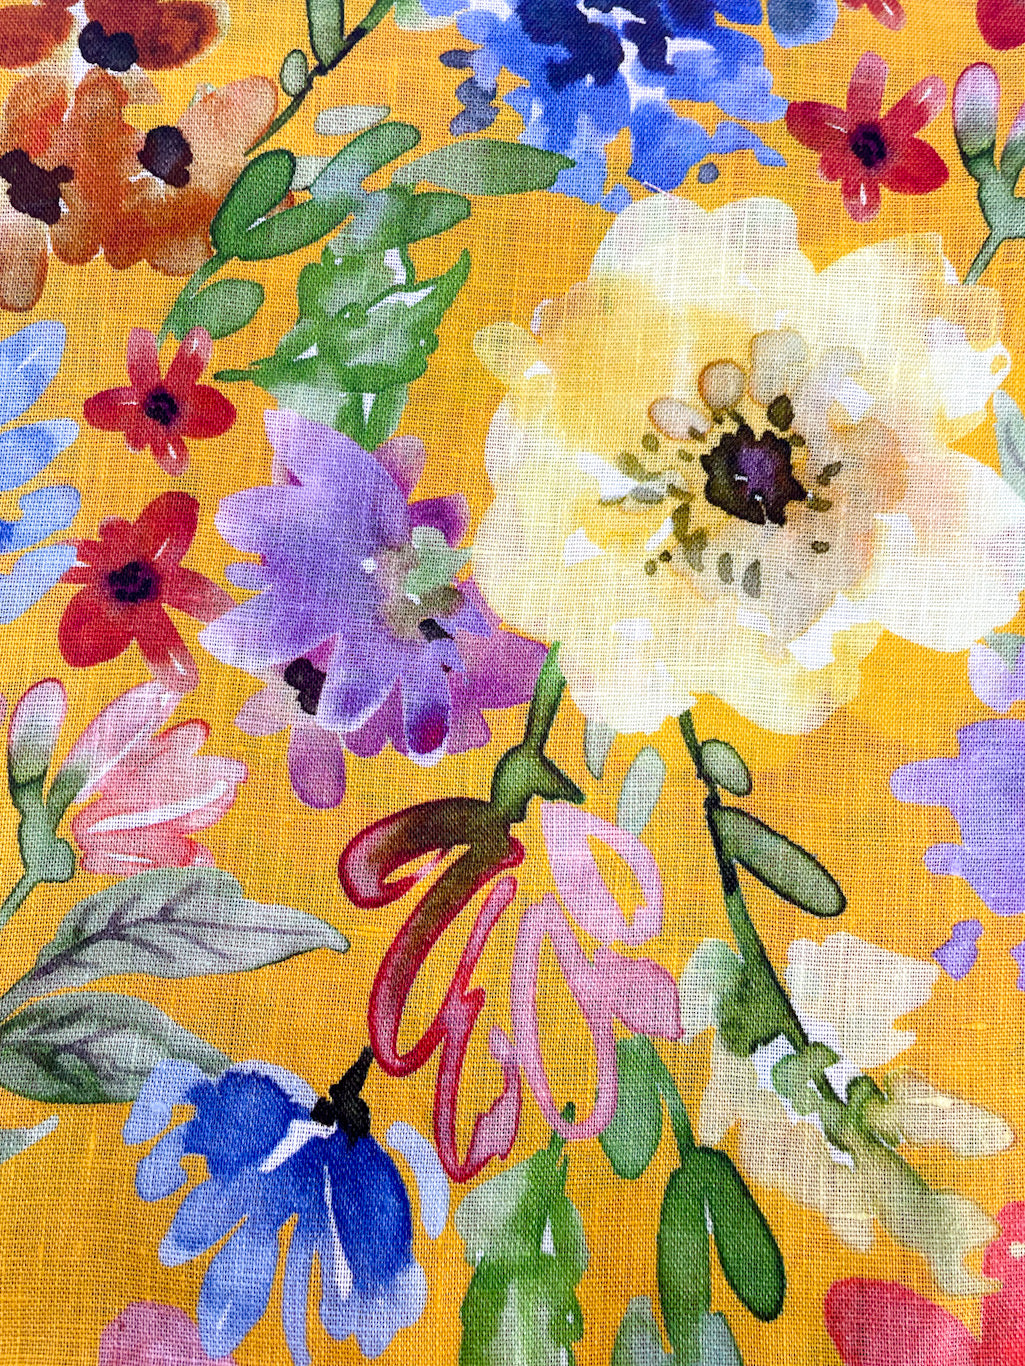 Floral Handkerchief Light Weight 100% Linen Fabric By The Yard, Dress, Skirt, Pant, Curtain, Drapery, Table Top, 57" Width/CL1103